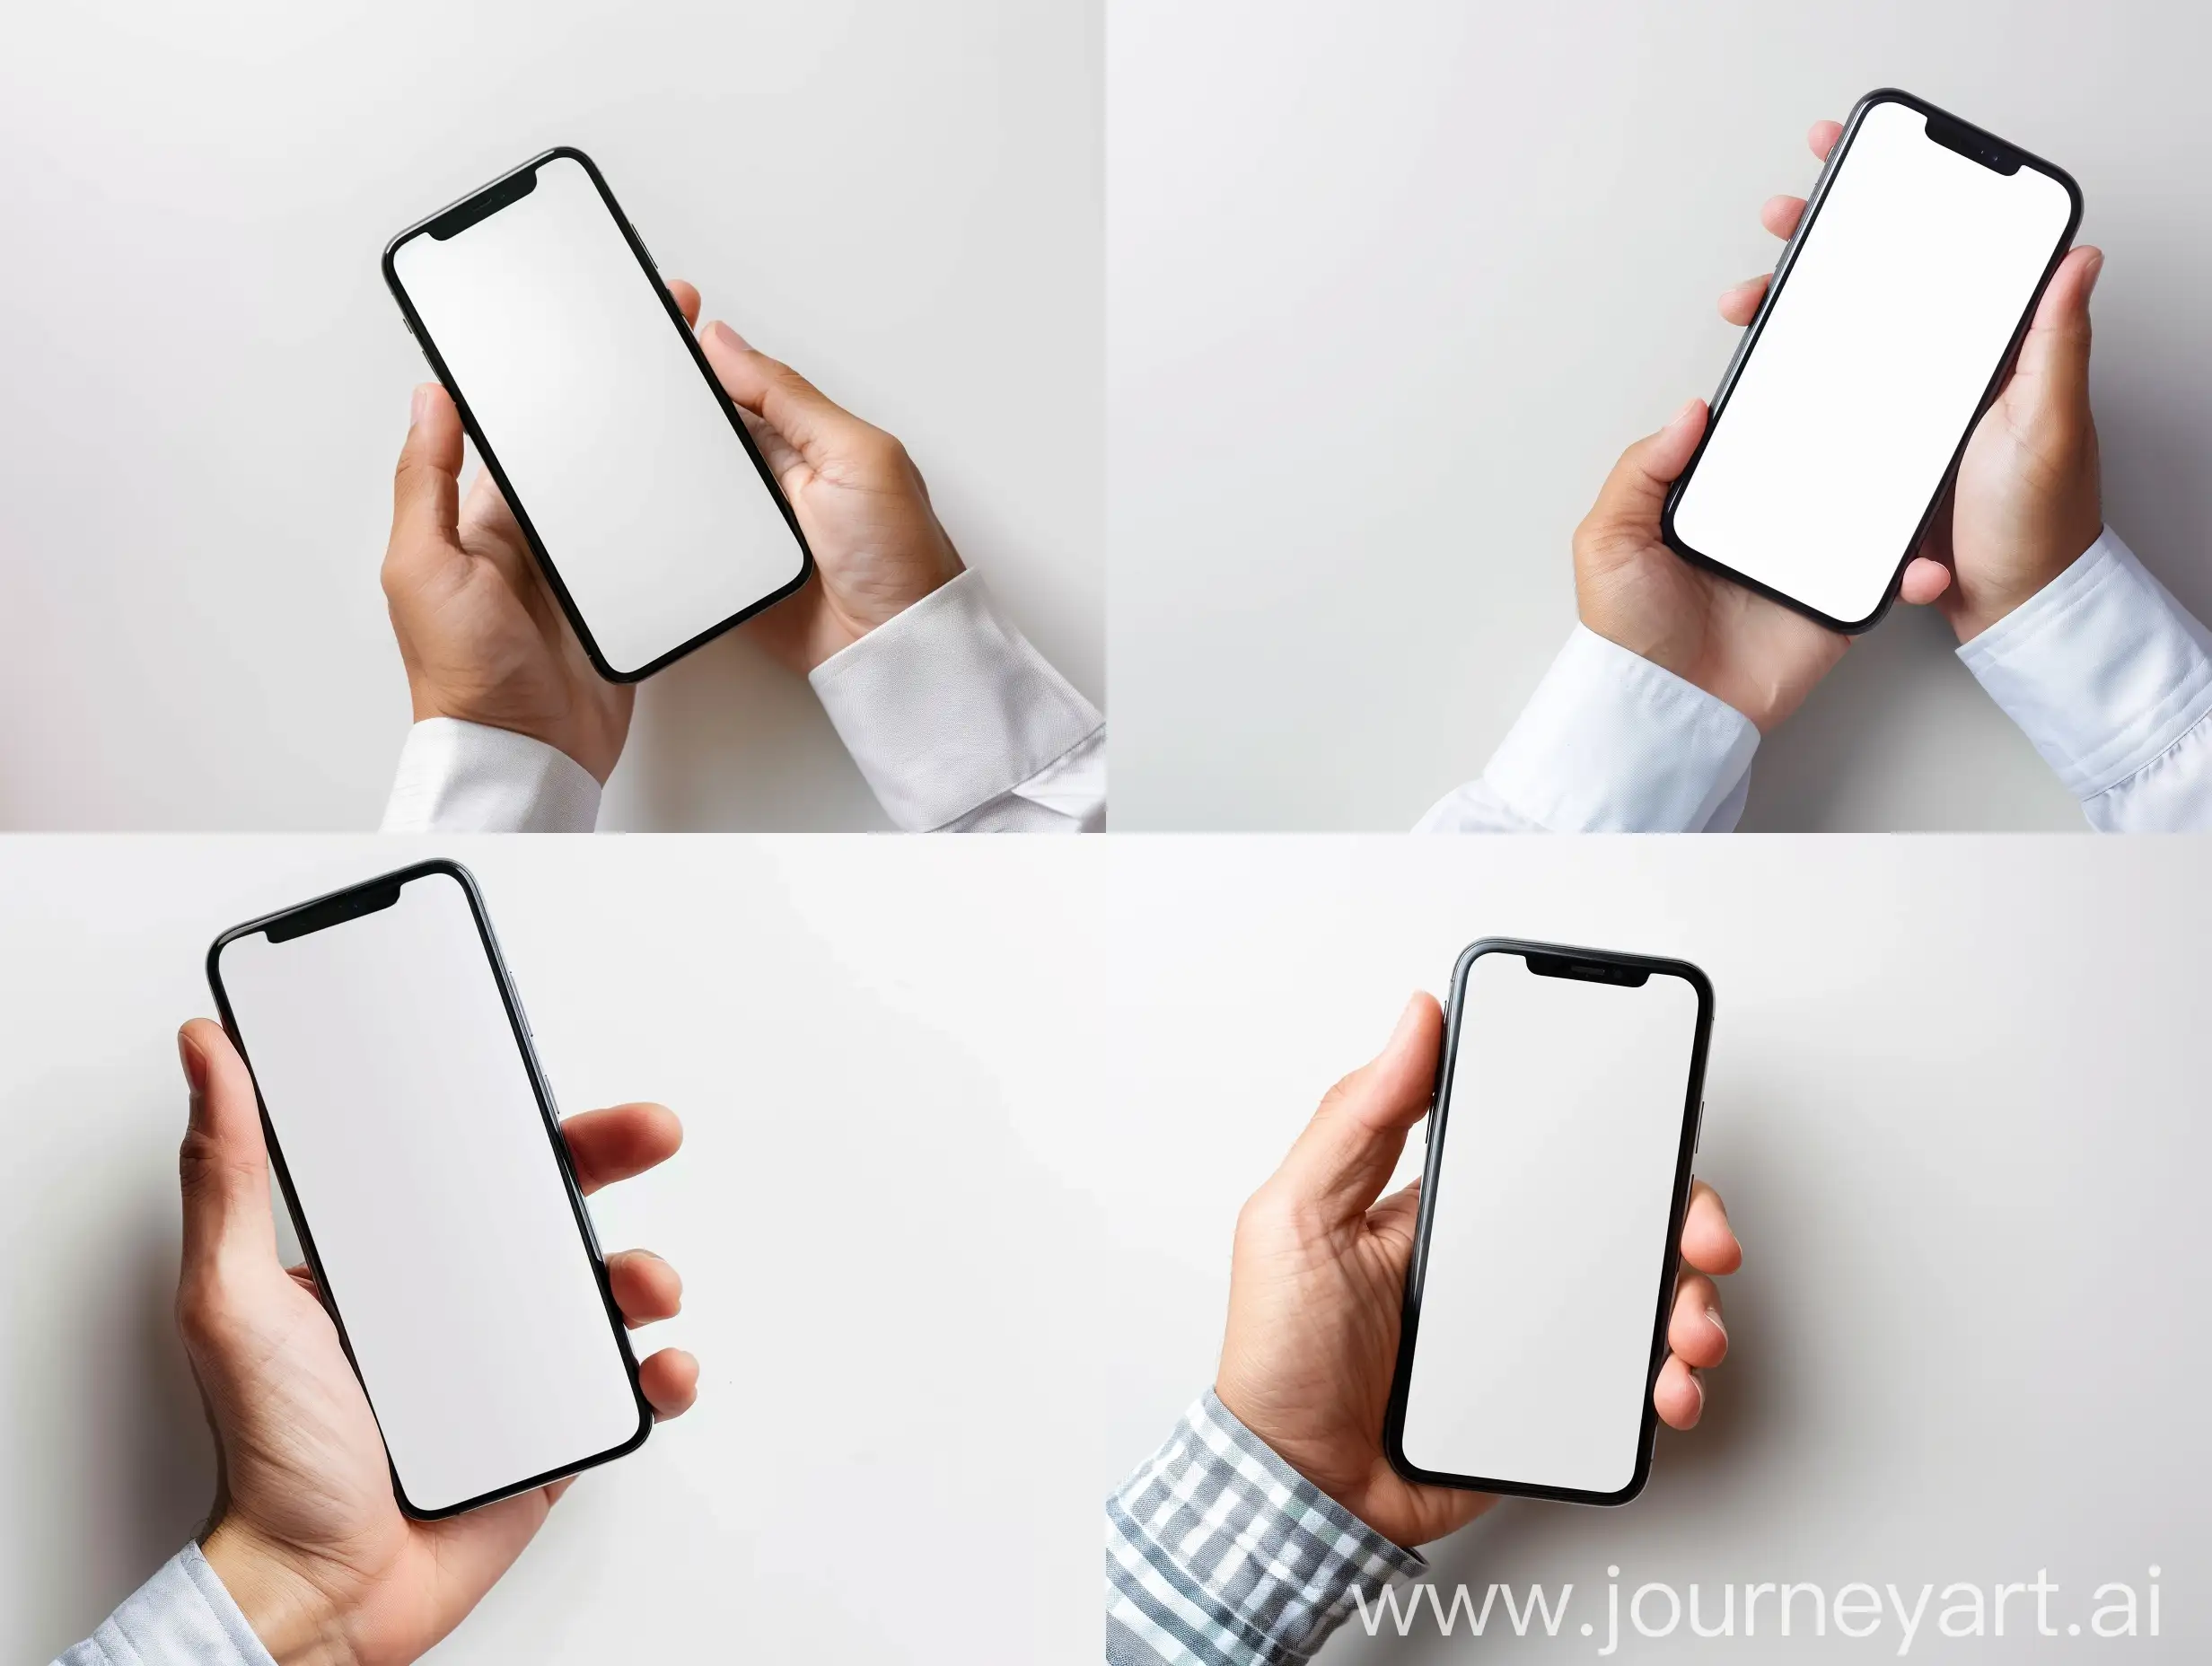 Closeup-of-Man-Holding-Smartphone-with-Blank-Screen-on-White-Background